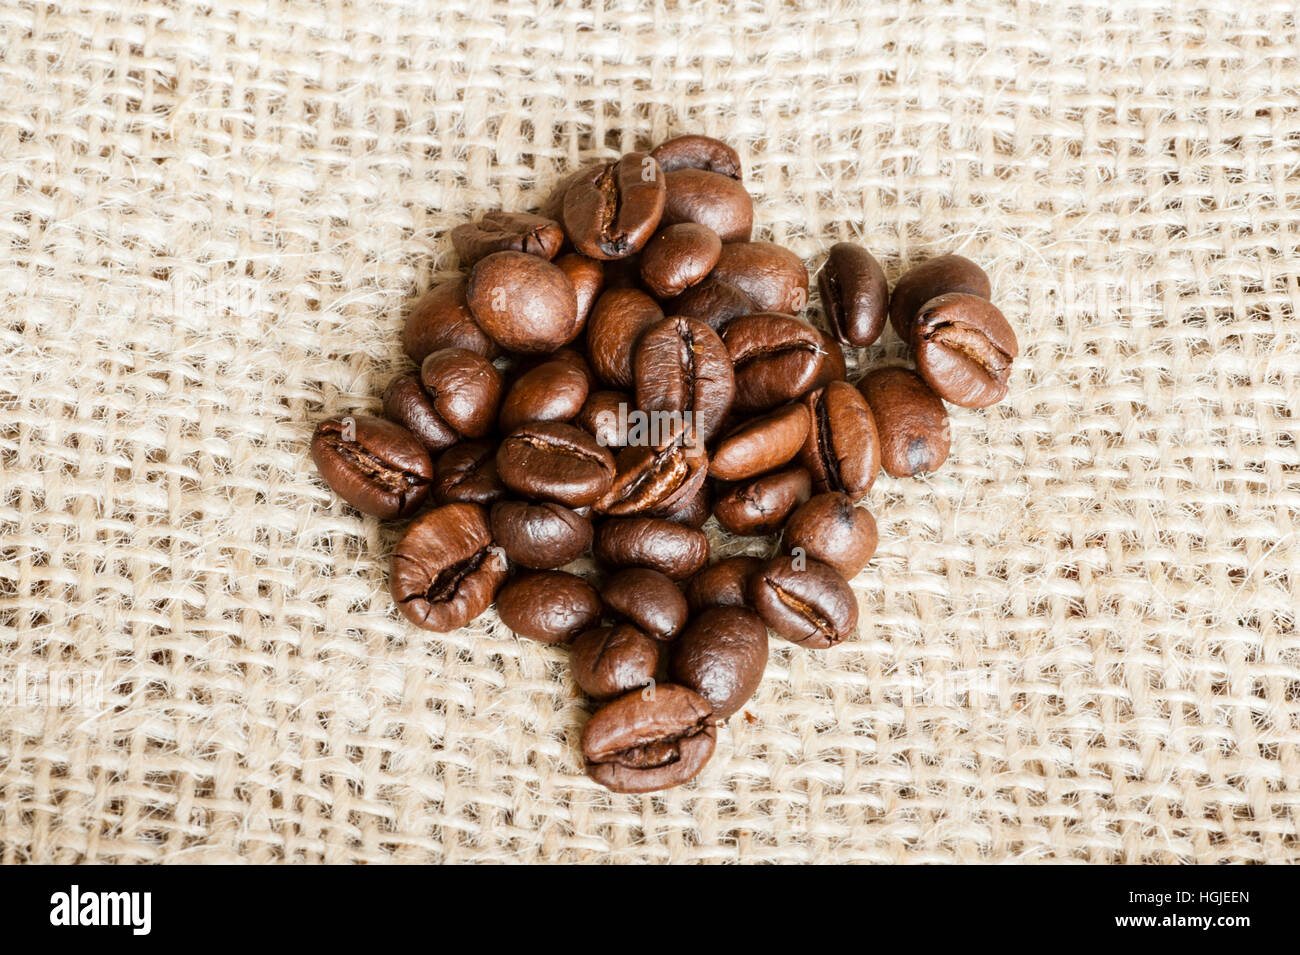 Whole coffee beans piled on a Hessian sack with copy space. Stock Photo